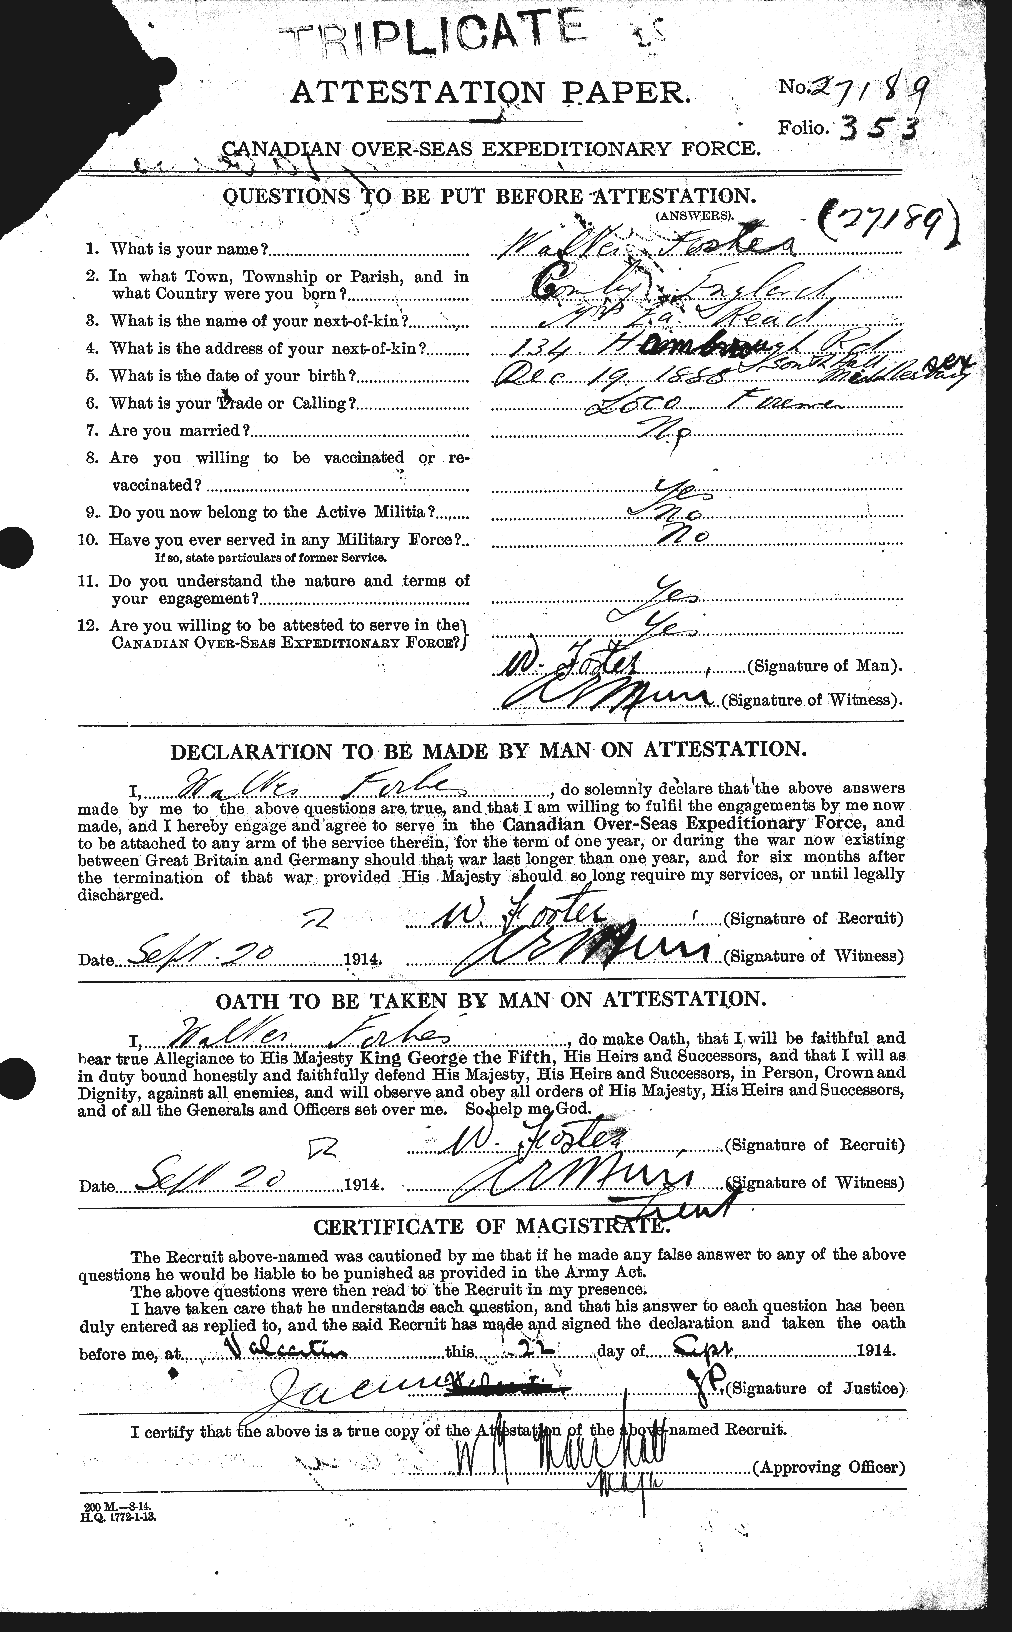 Personnel Records of the First World War - CEF 335251a